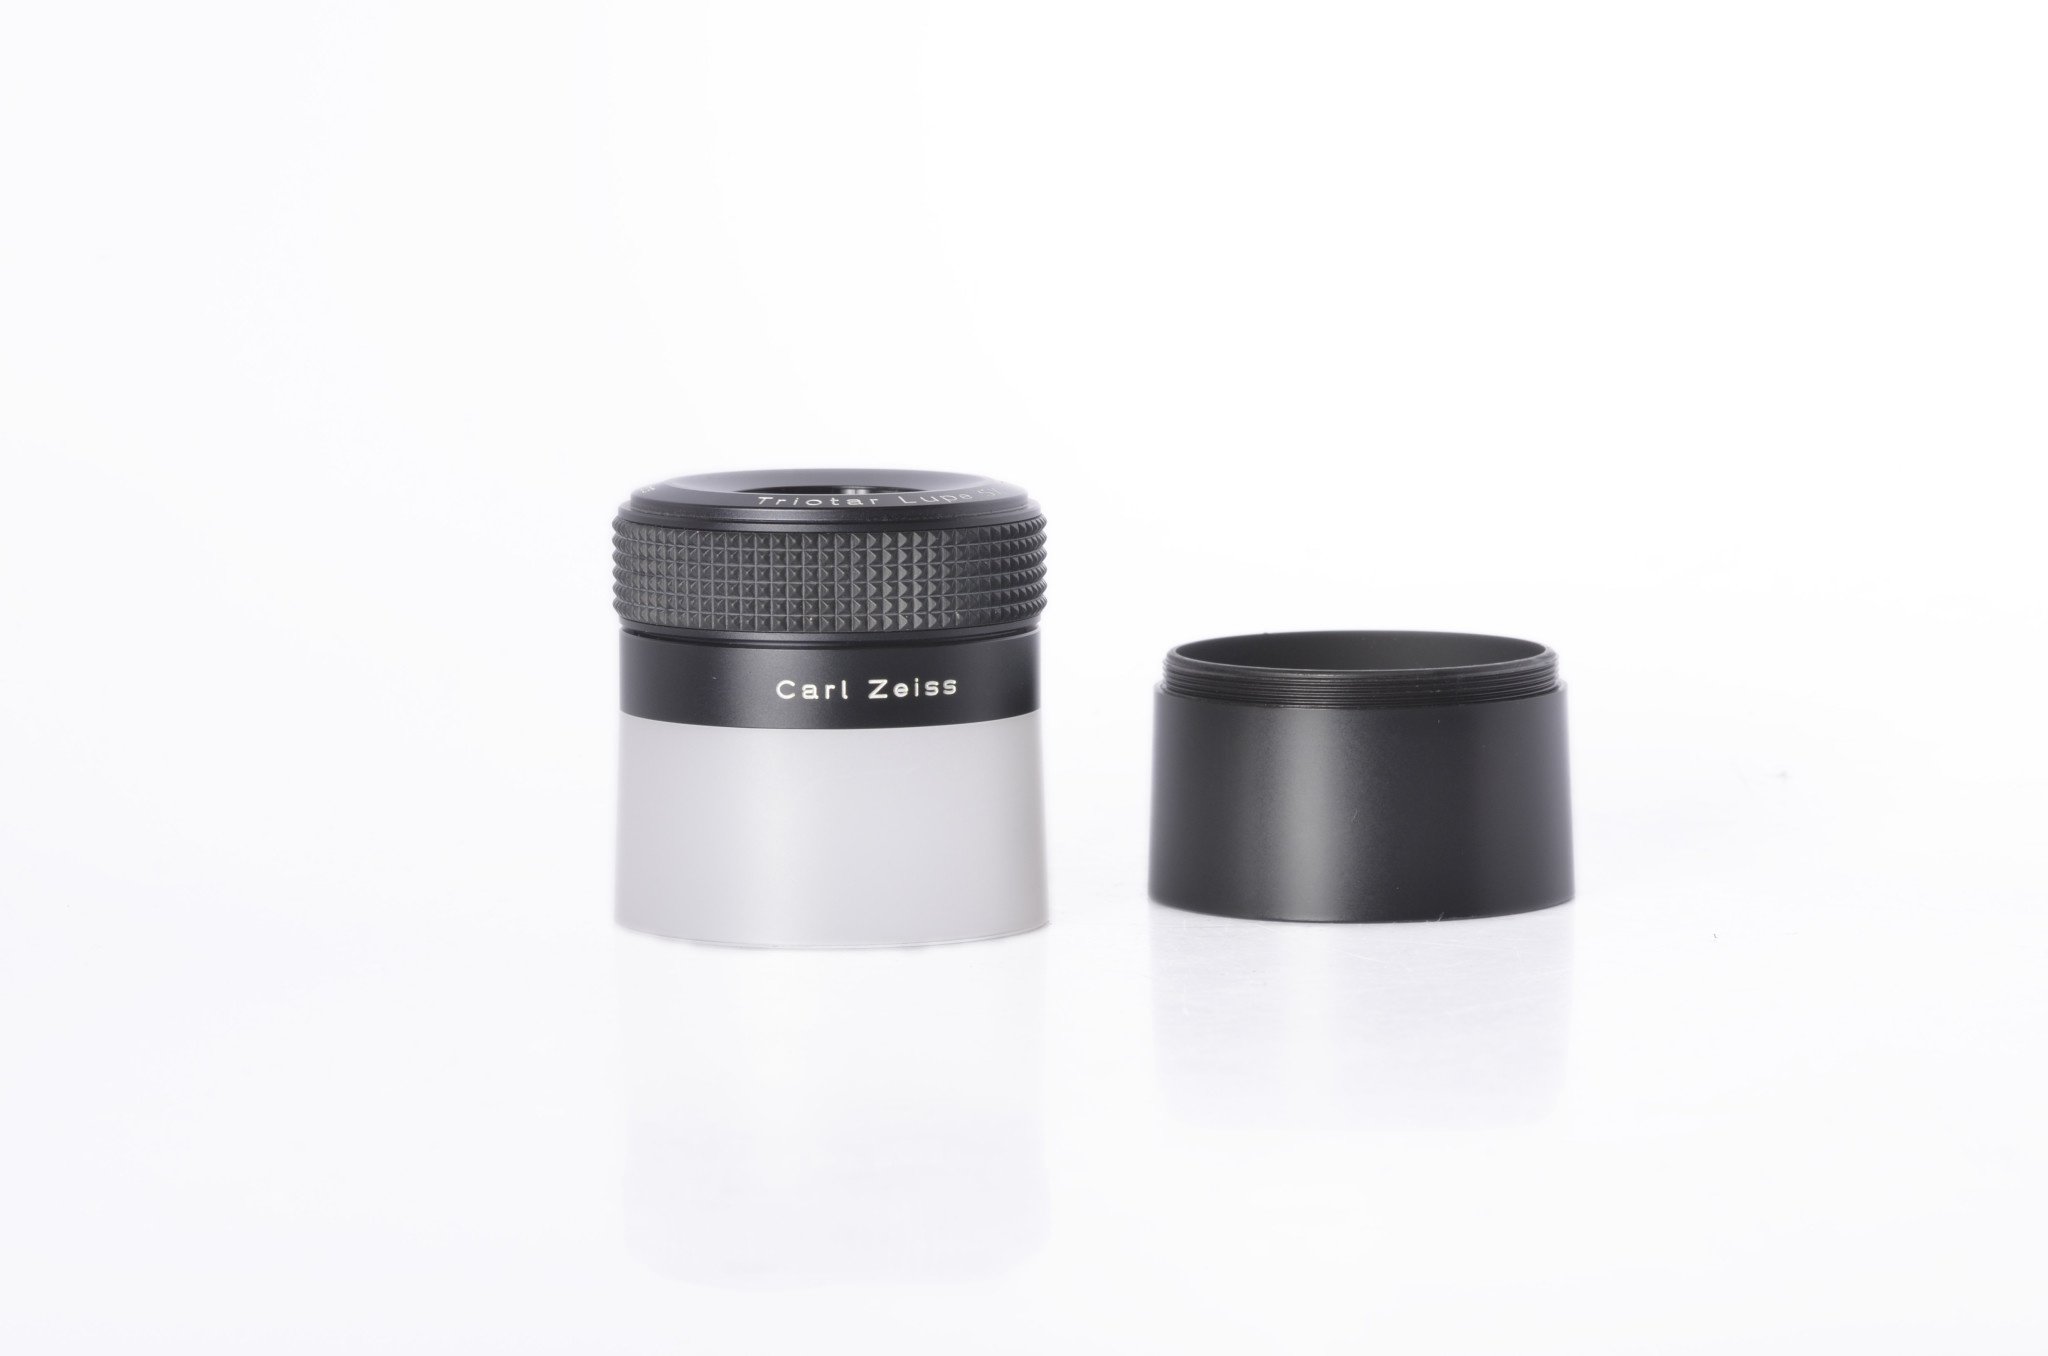 Carl Zeiss Triotar T* Lupe 5x - LeZot Camera | Sales and Camera 